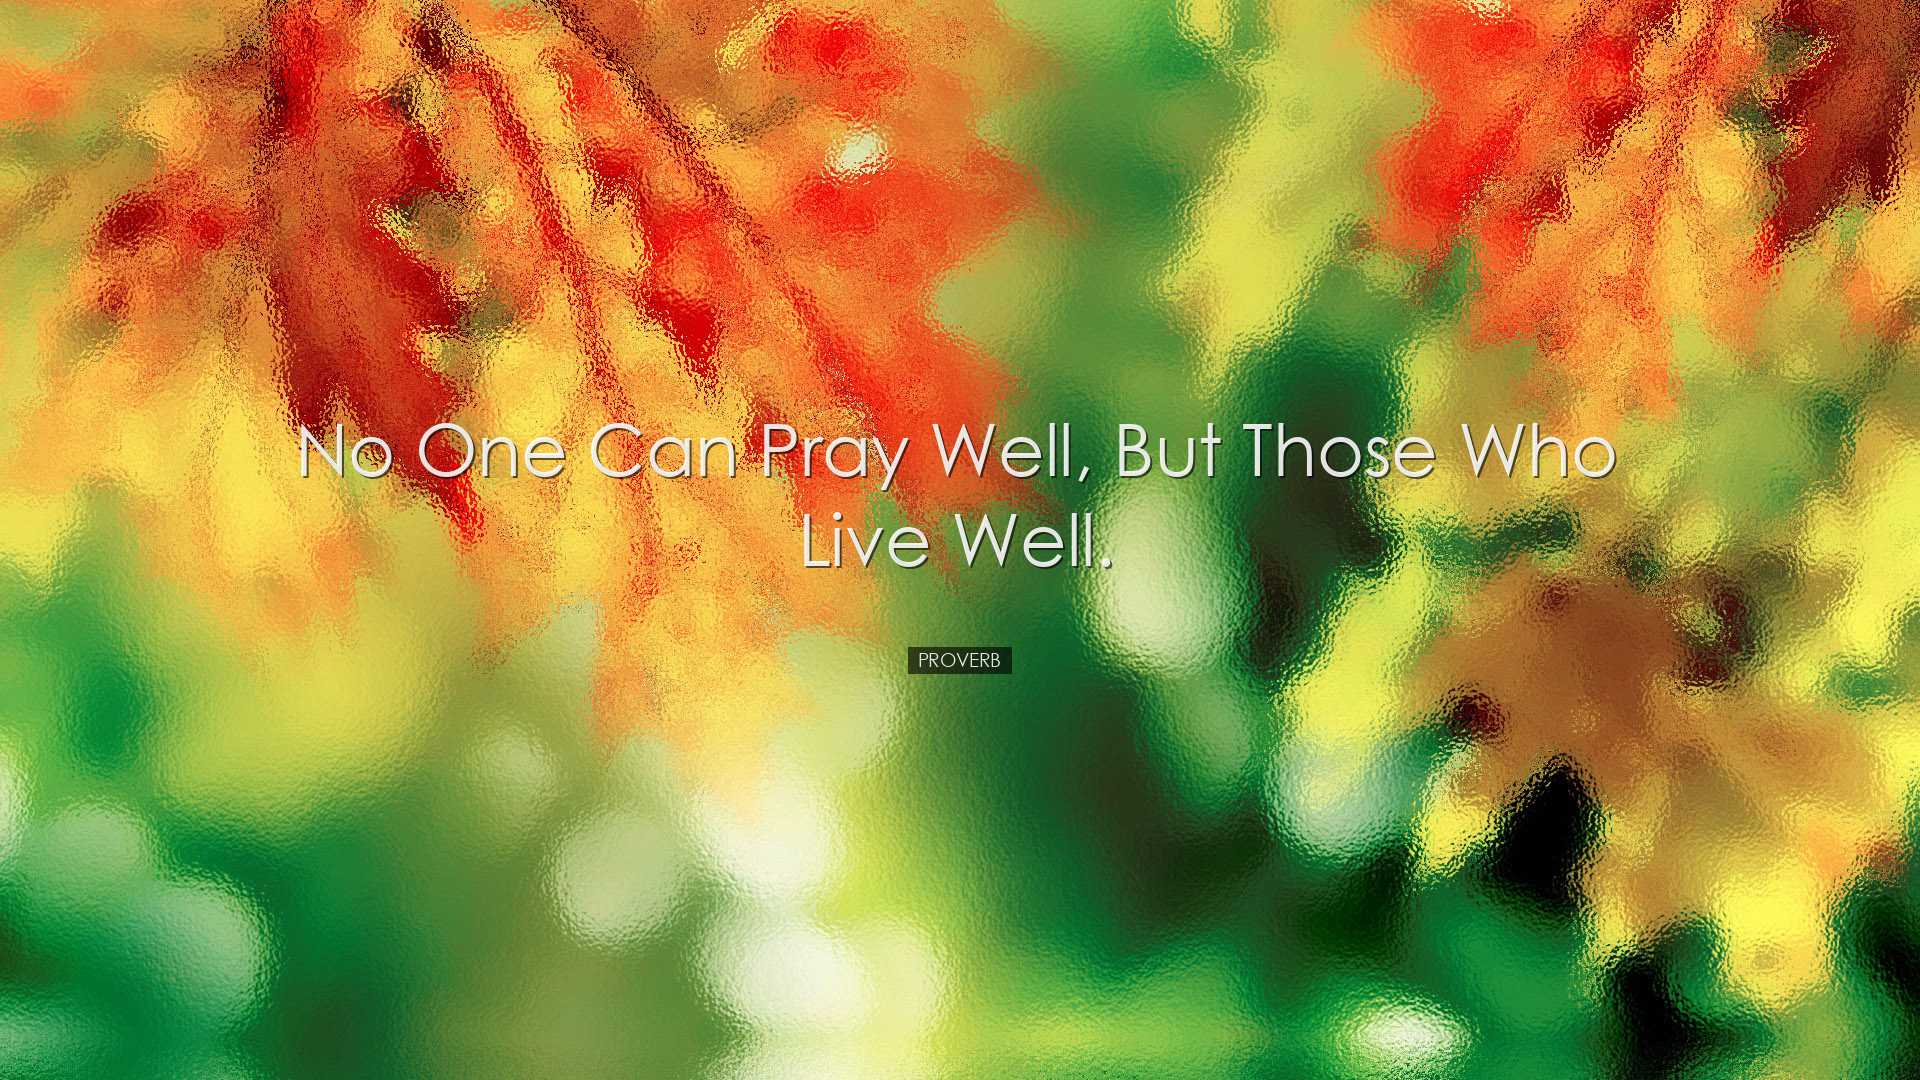 No one can pray well, but those who live well. - Proverb